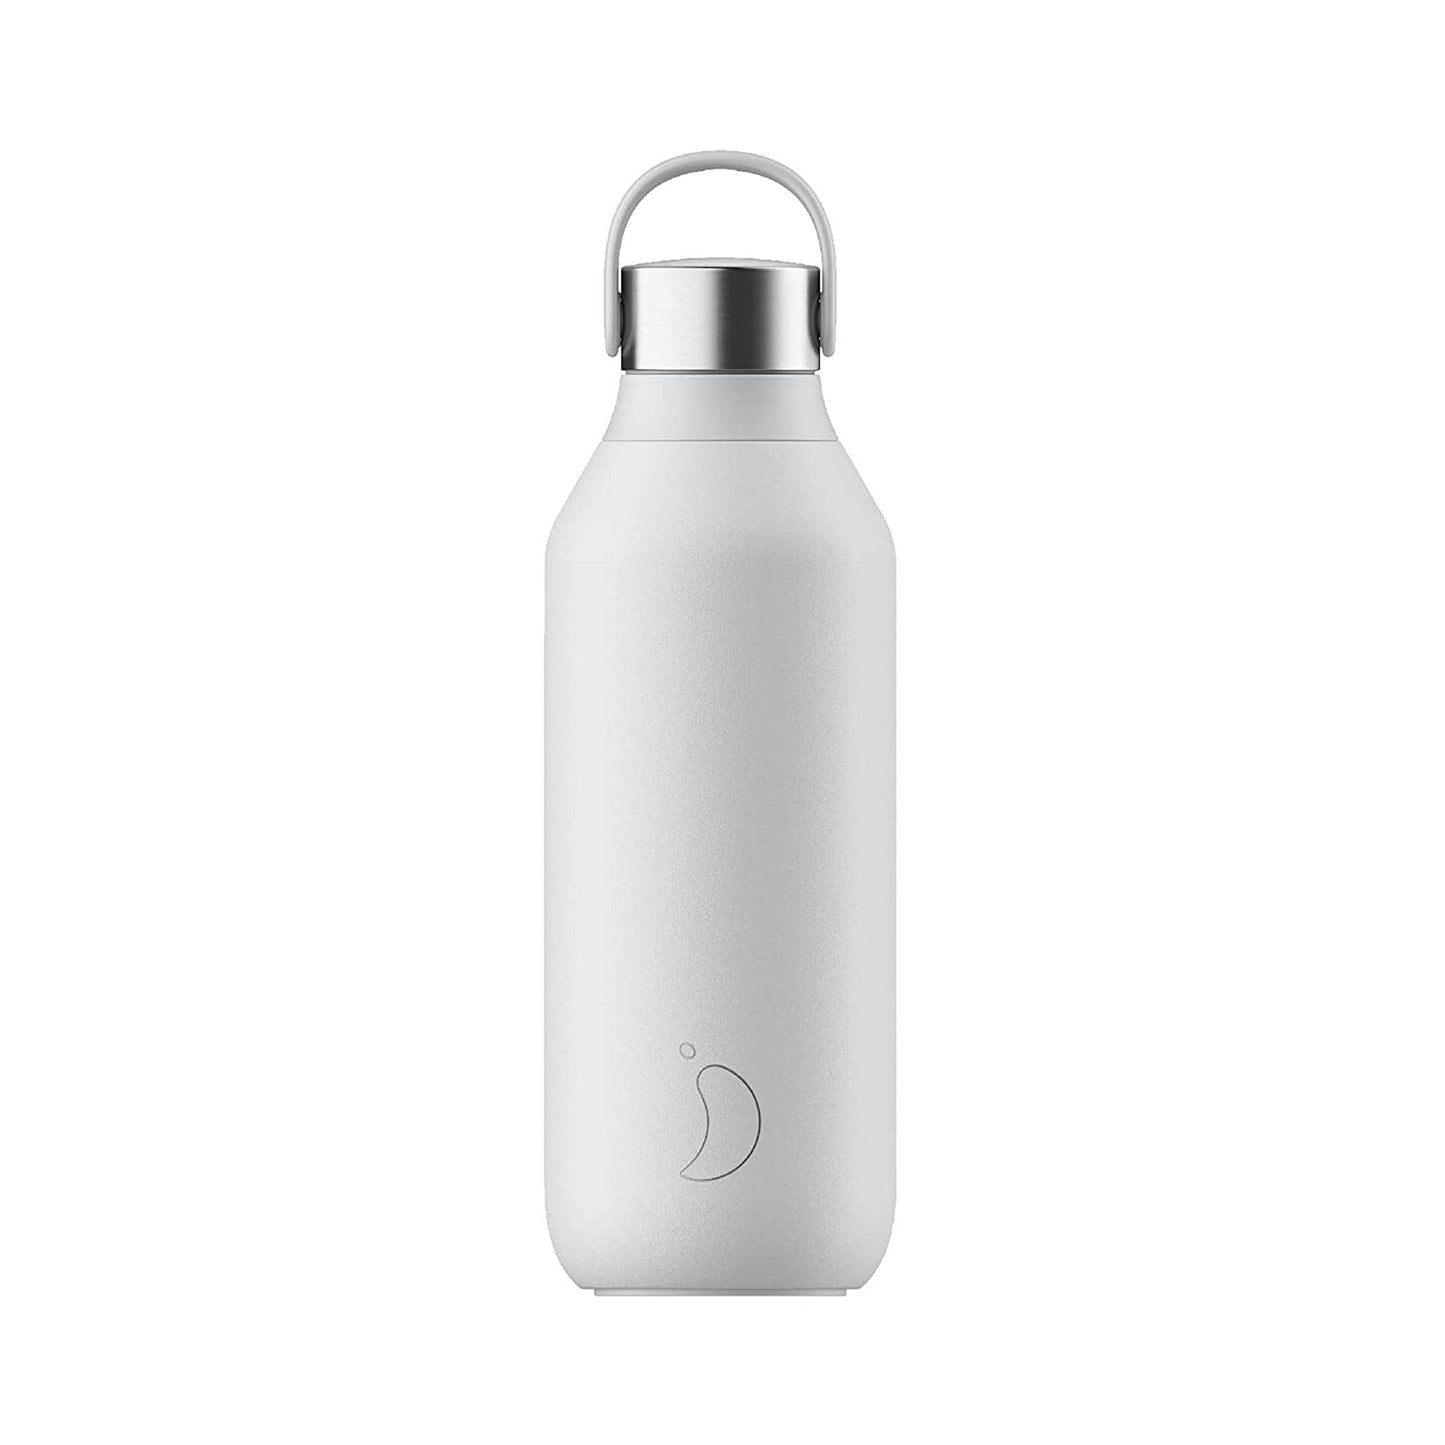 Chilly's Water Bottles Chilly’s 500ml Series 2 Stainless Steel Water Bottle - Artic White